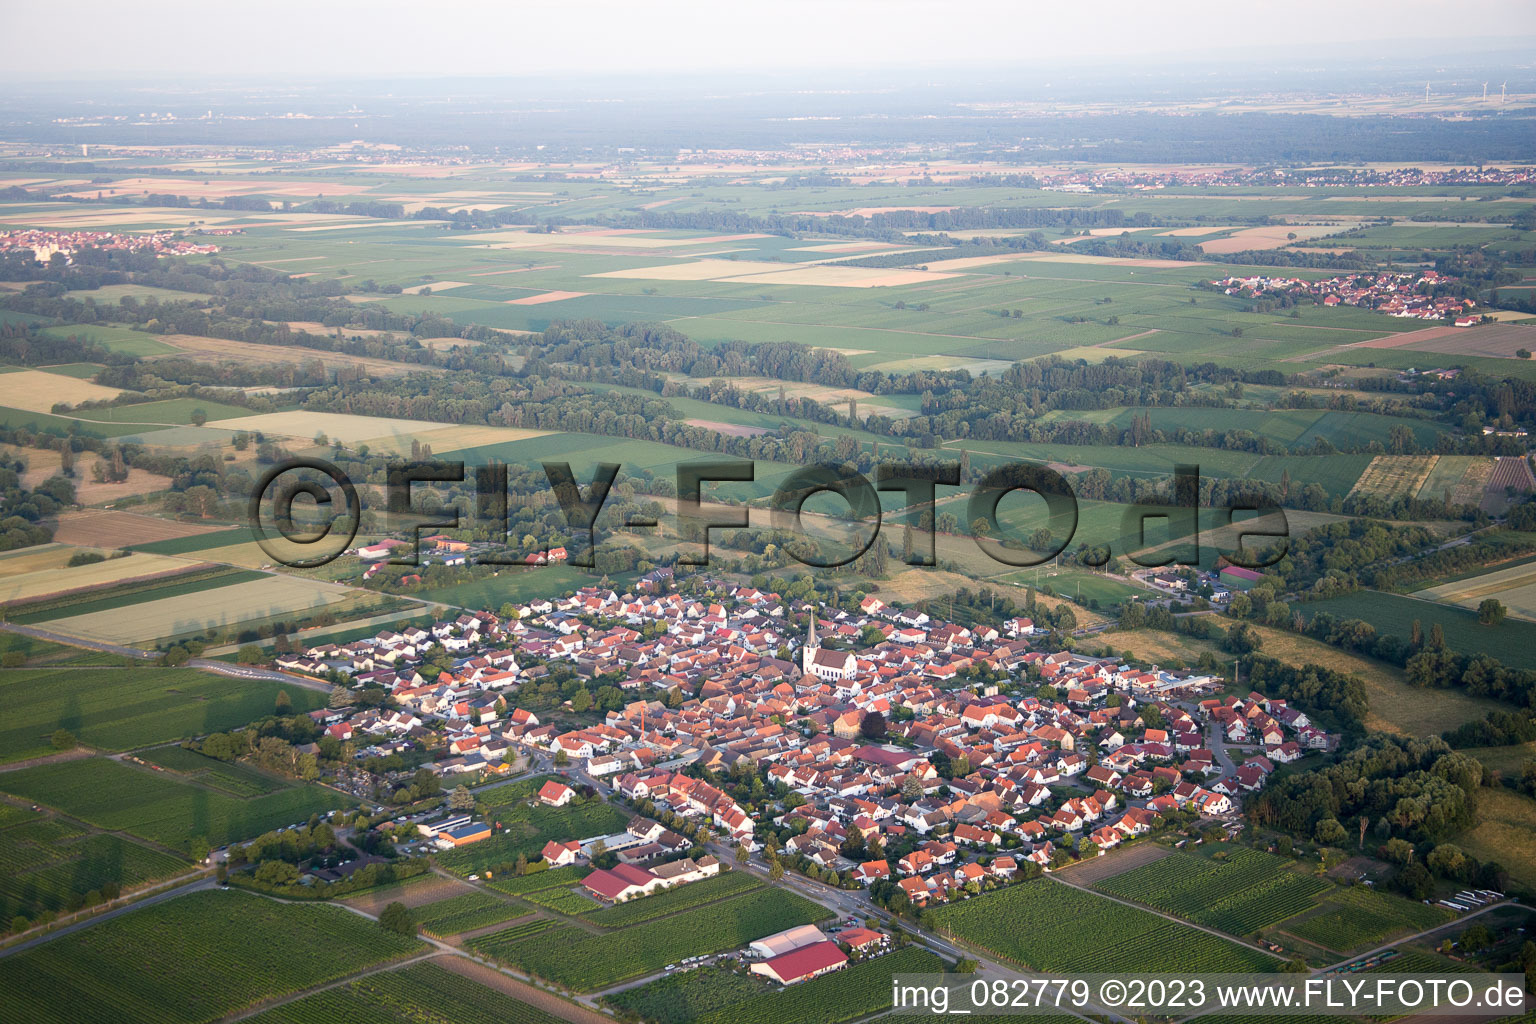 Venningen in the state Rhineland-Palatinate, Germany from above